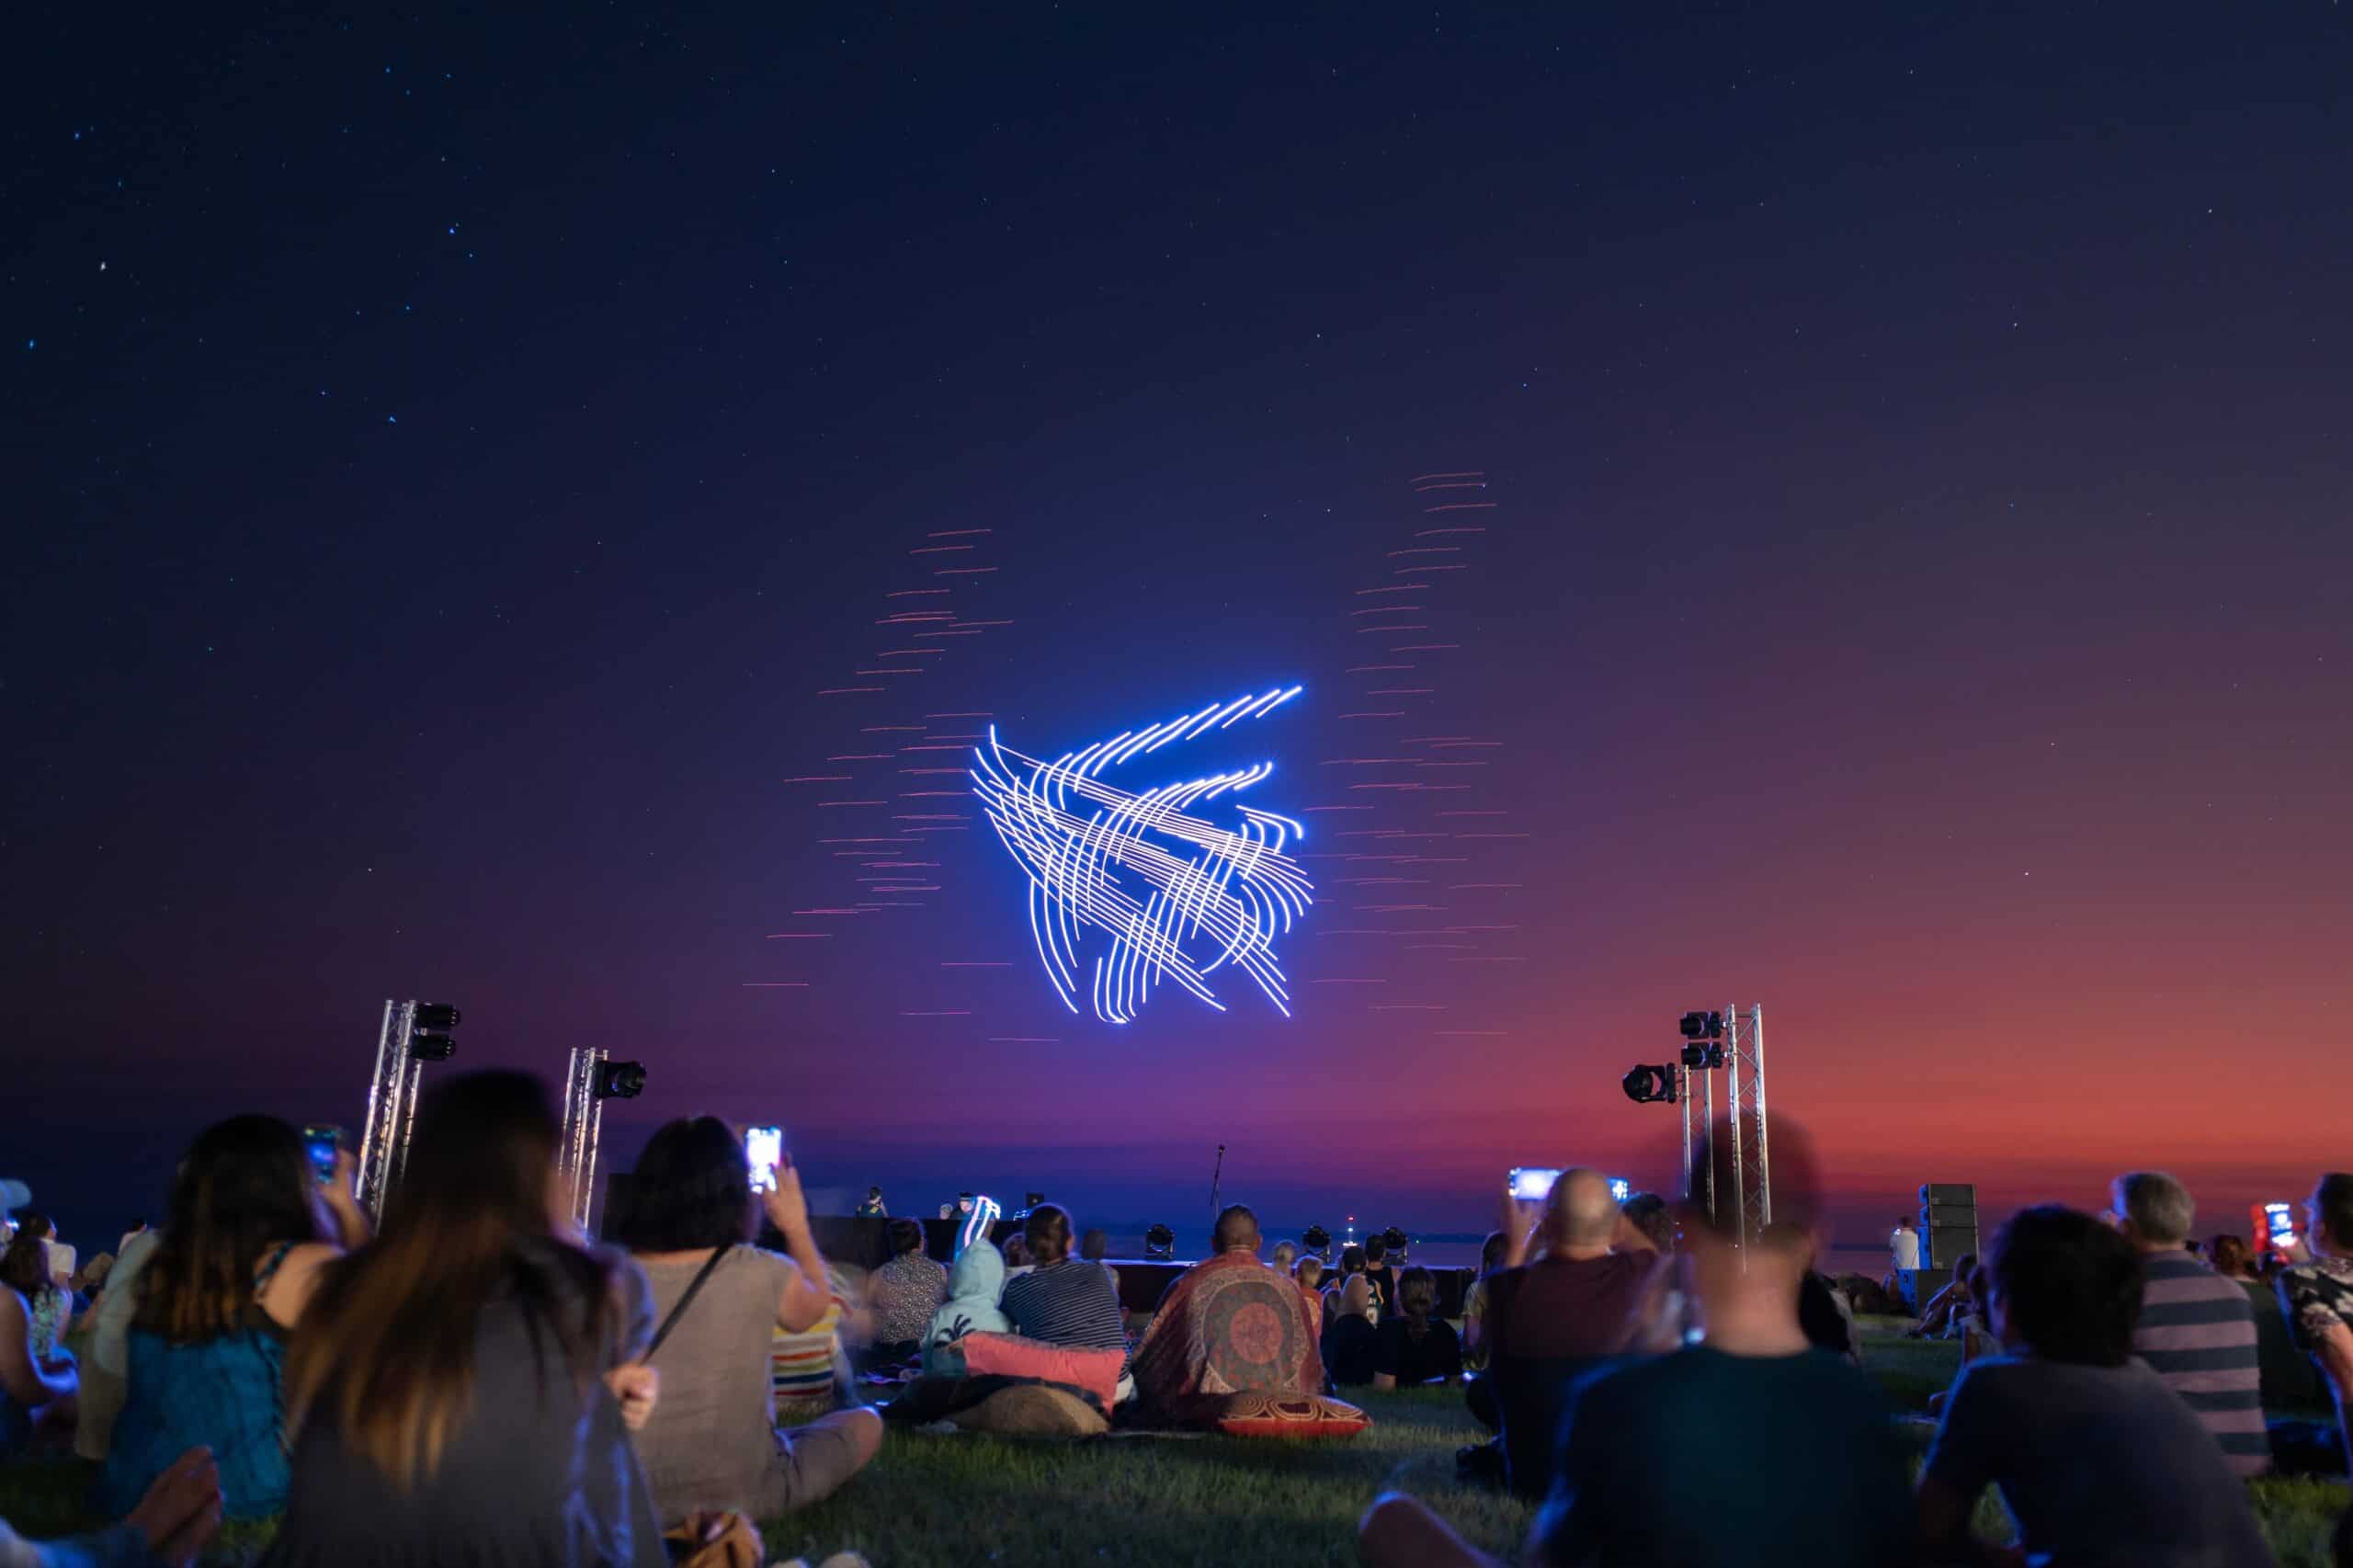 A dark sky illuminated by a drone show, with people in the audience capturing videos and photos on their mobile phones.